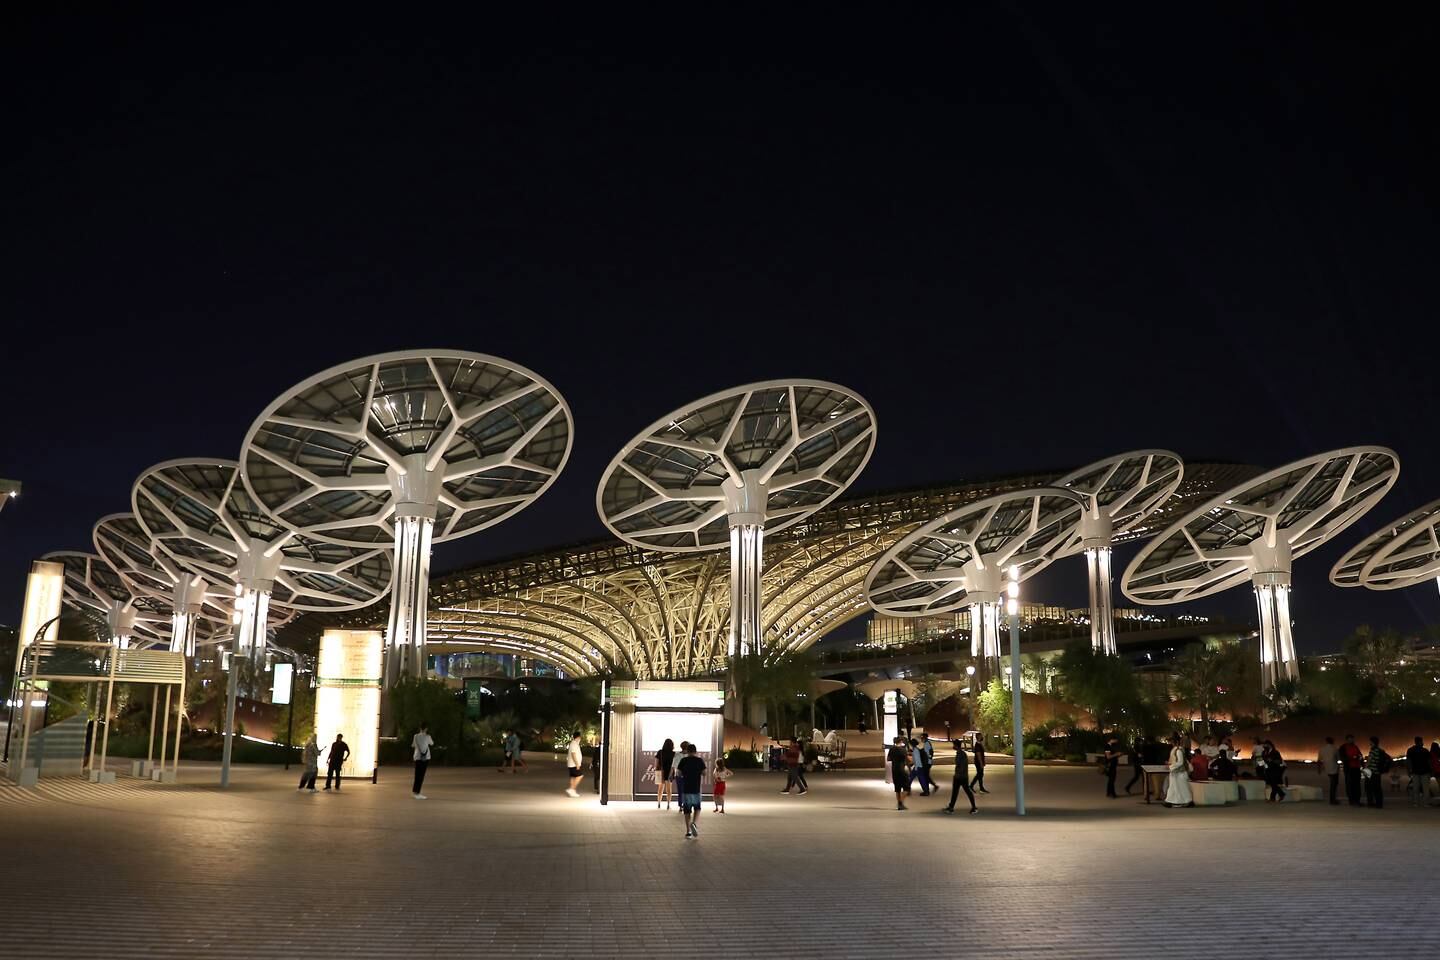 View of the Sustainability Pavilion at night. Pawan Singh / The National